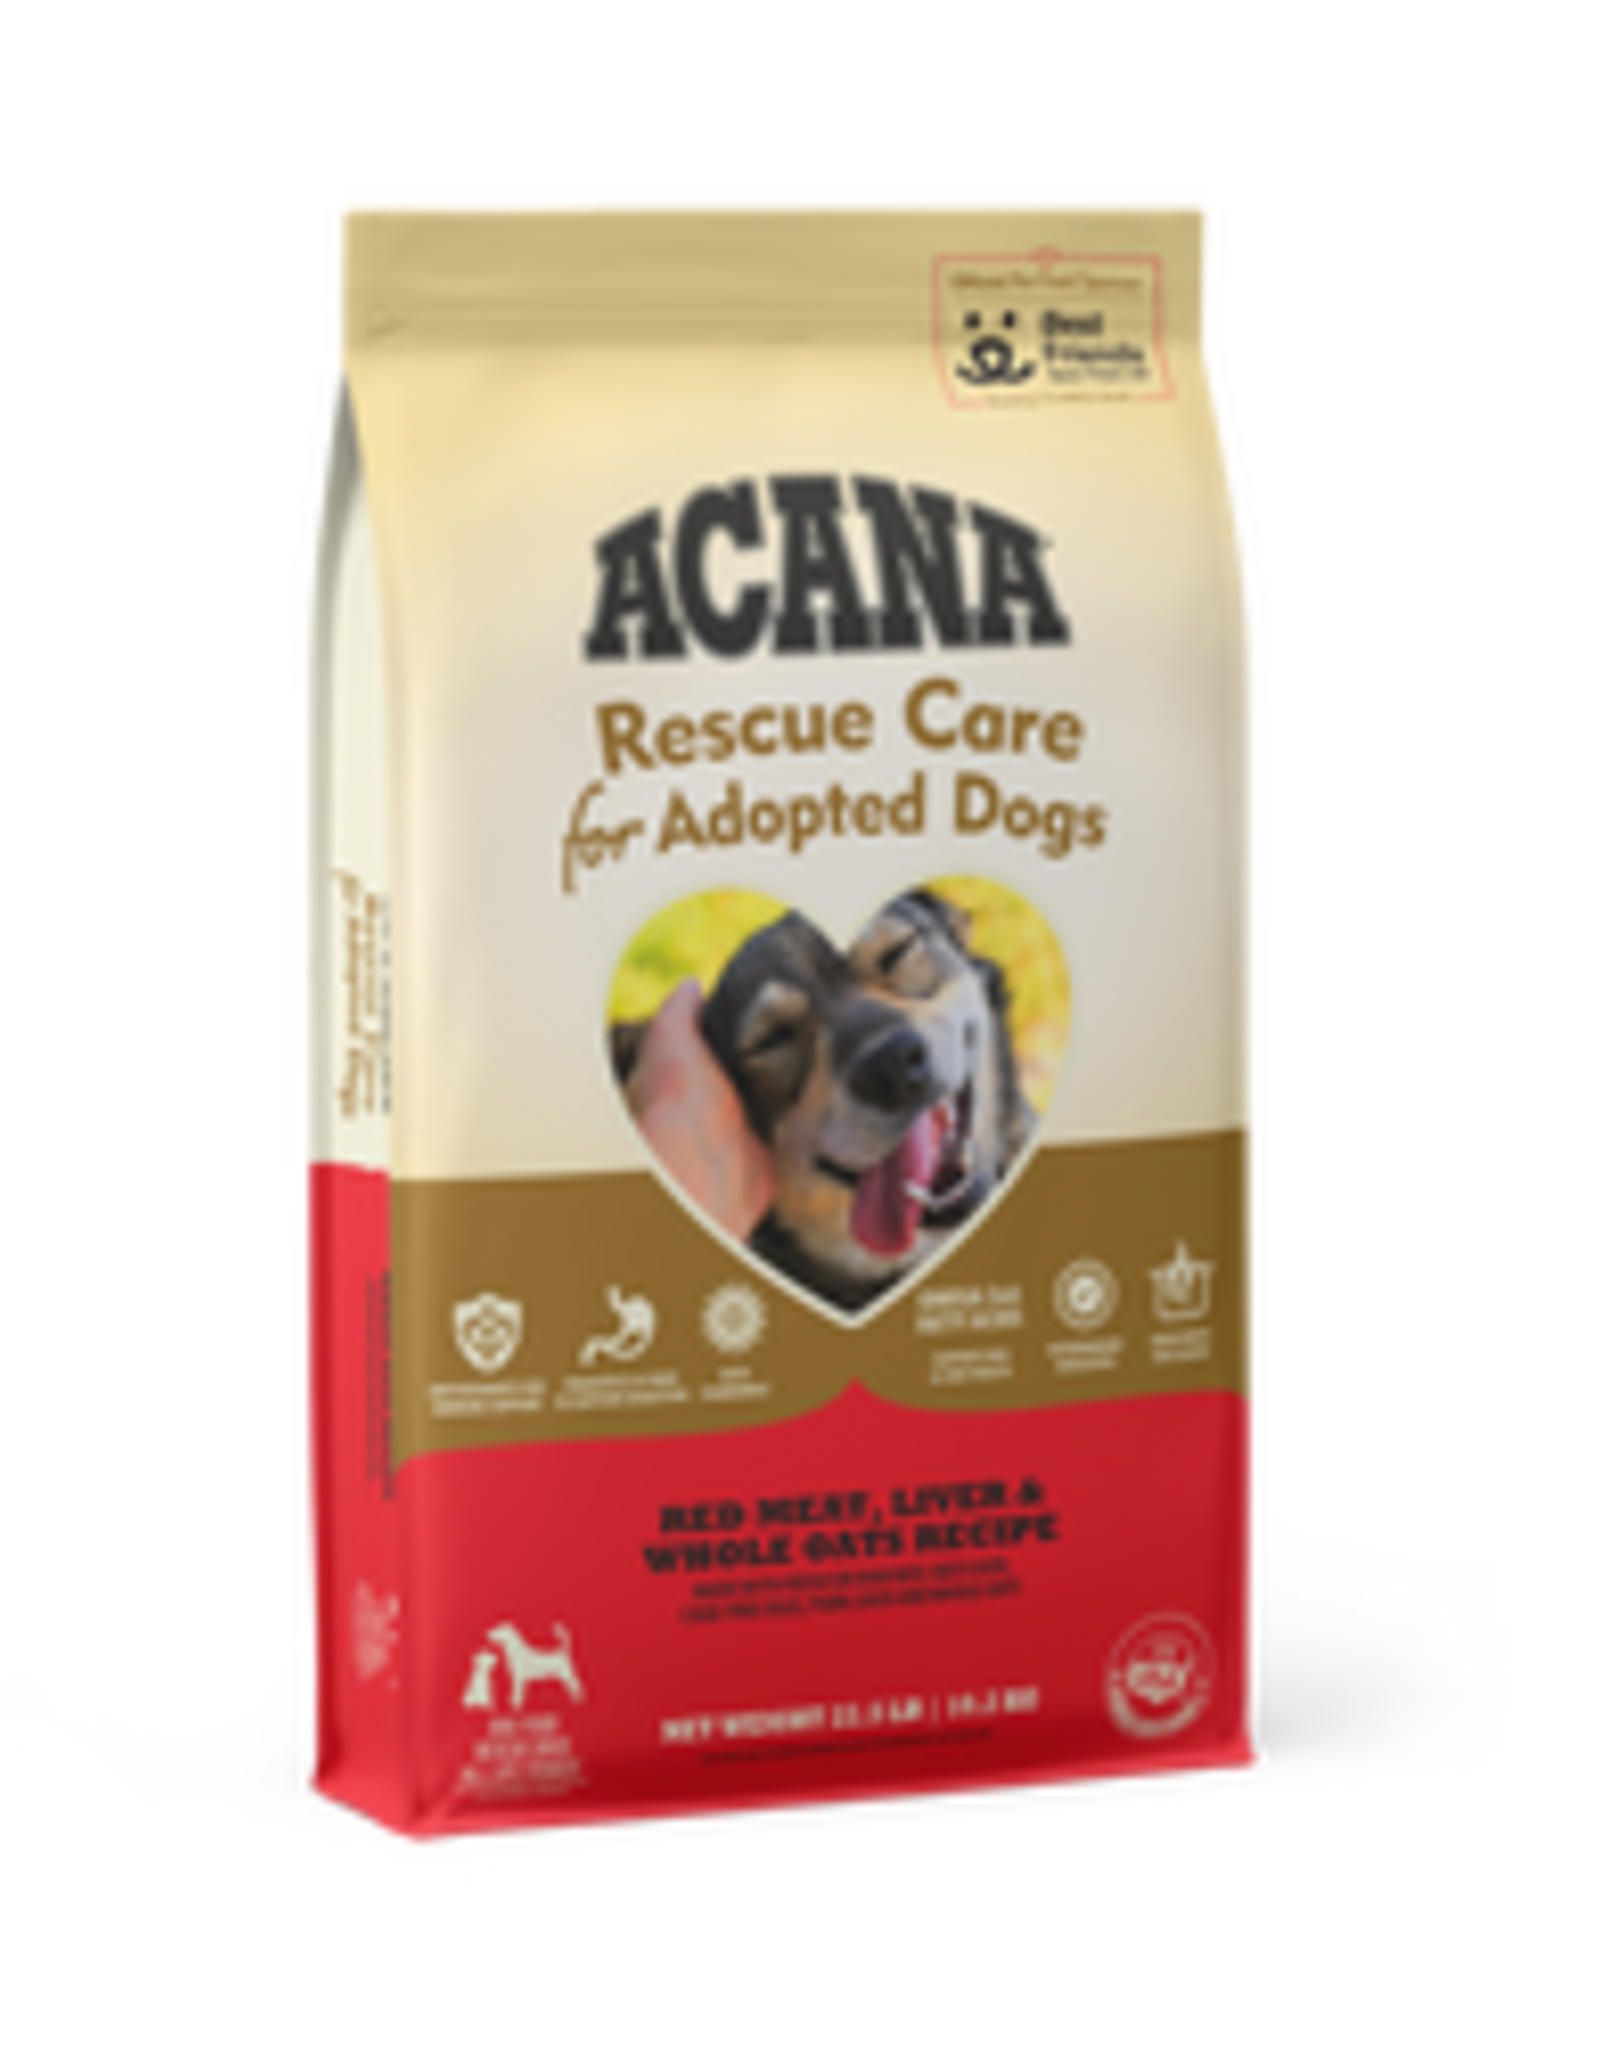 CHAMPION PET FOOD ACANA DOG RESCUE CARE RED MEAT & OATS 22.5LB